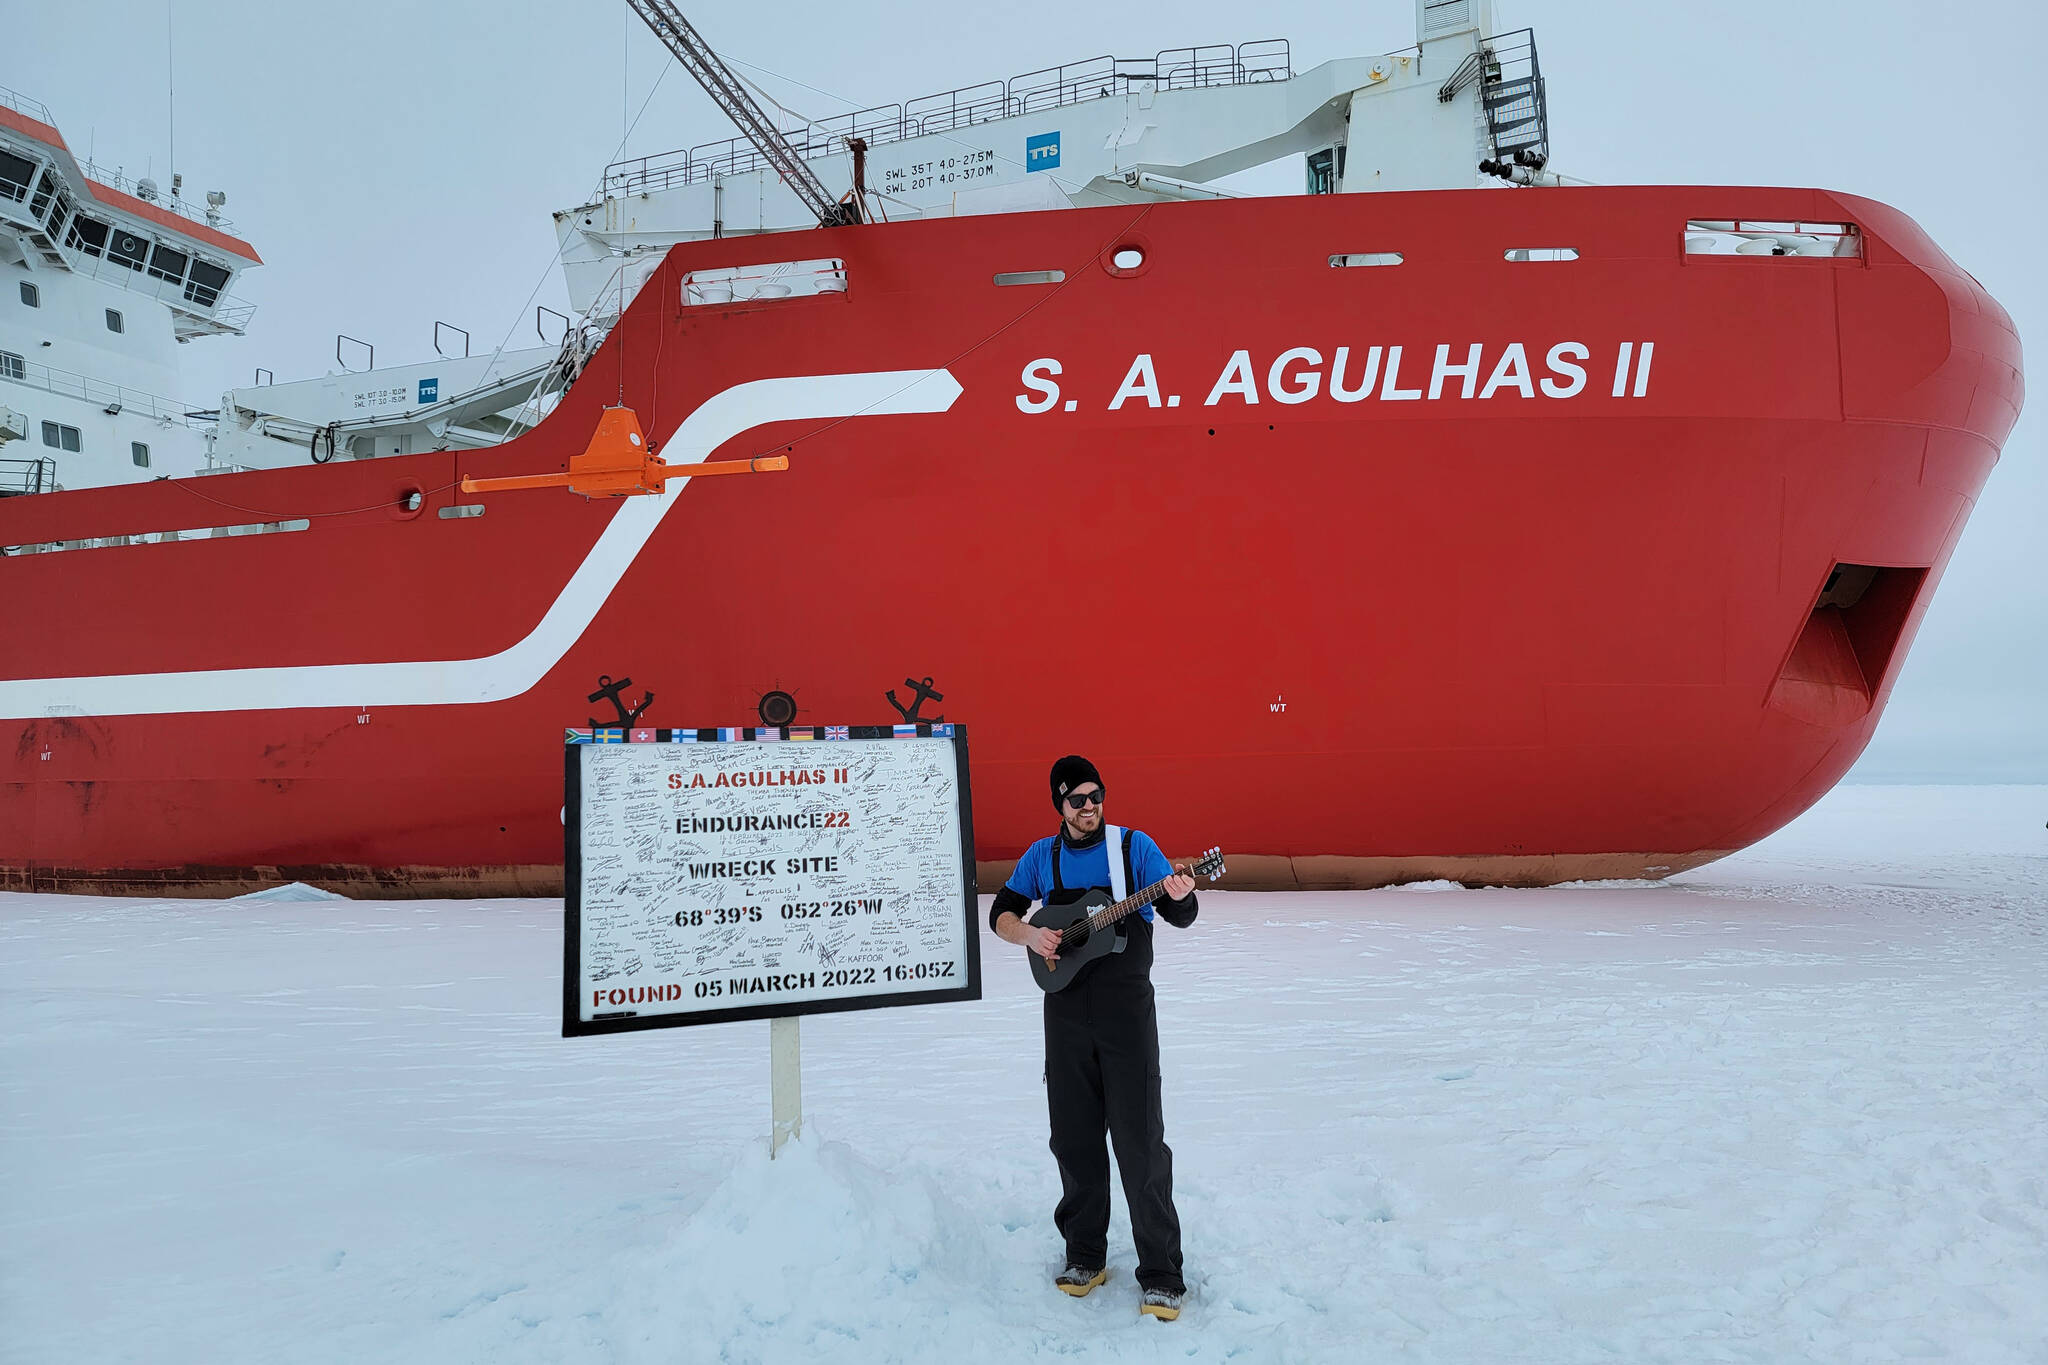 Michael Patz, raised in Juneau, stands on the ice in front of the icebreaker S.A. Agulhas II next to a sign showing the location of the wreck of Ernest Shackleton’s vessel, the Endurance, in this March 2022 photo. The ship was rediscovered March 5, 2022, by searchers aboard the icebreaker. (Courtesy photo/Michael Patz)